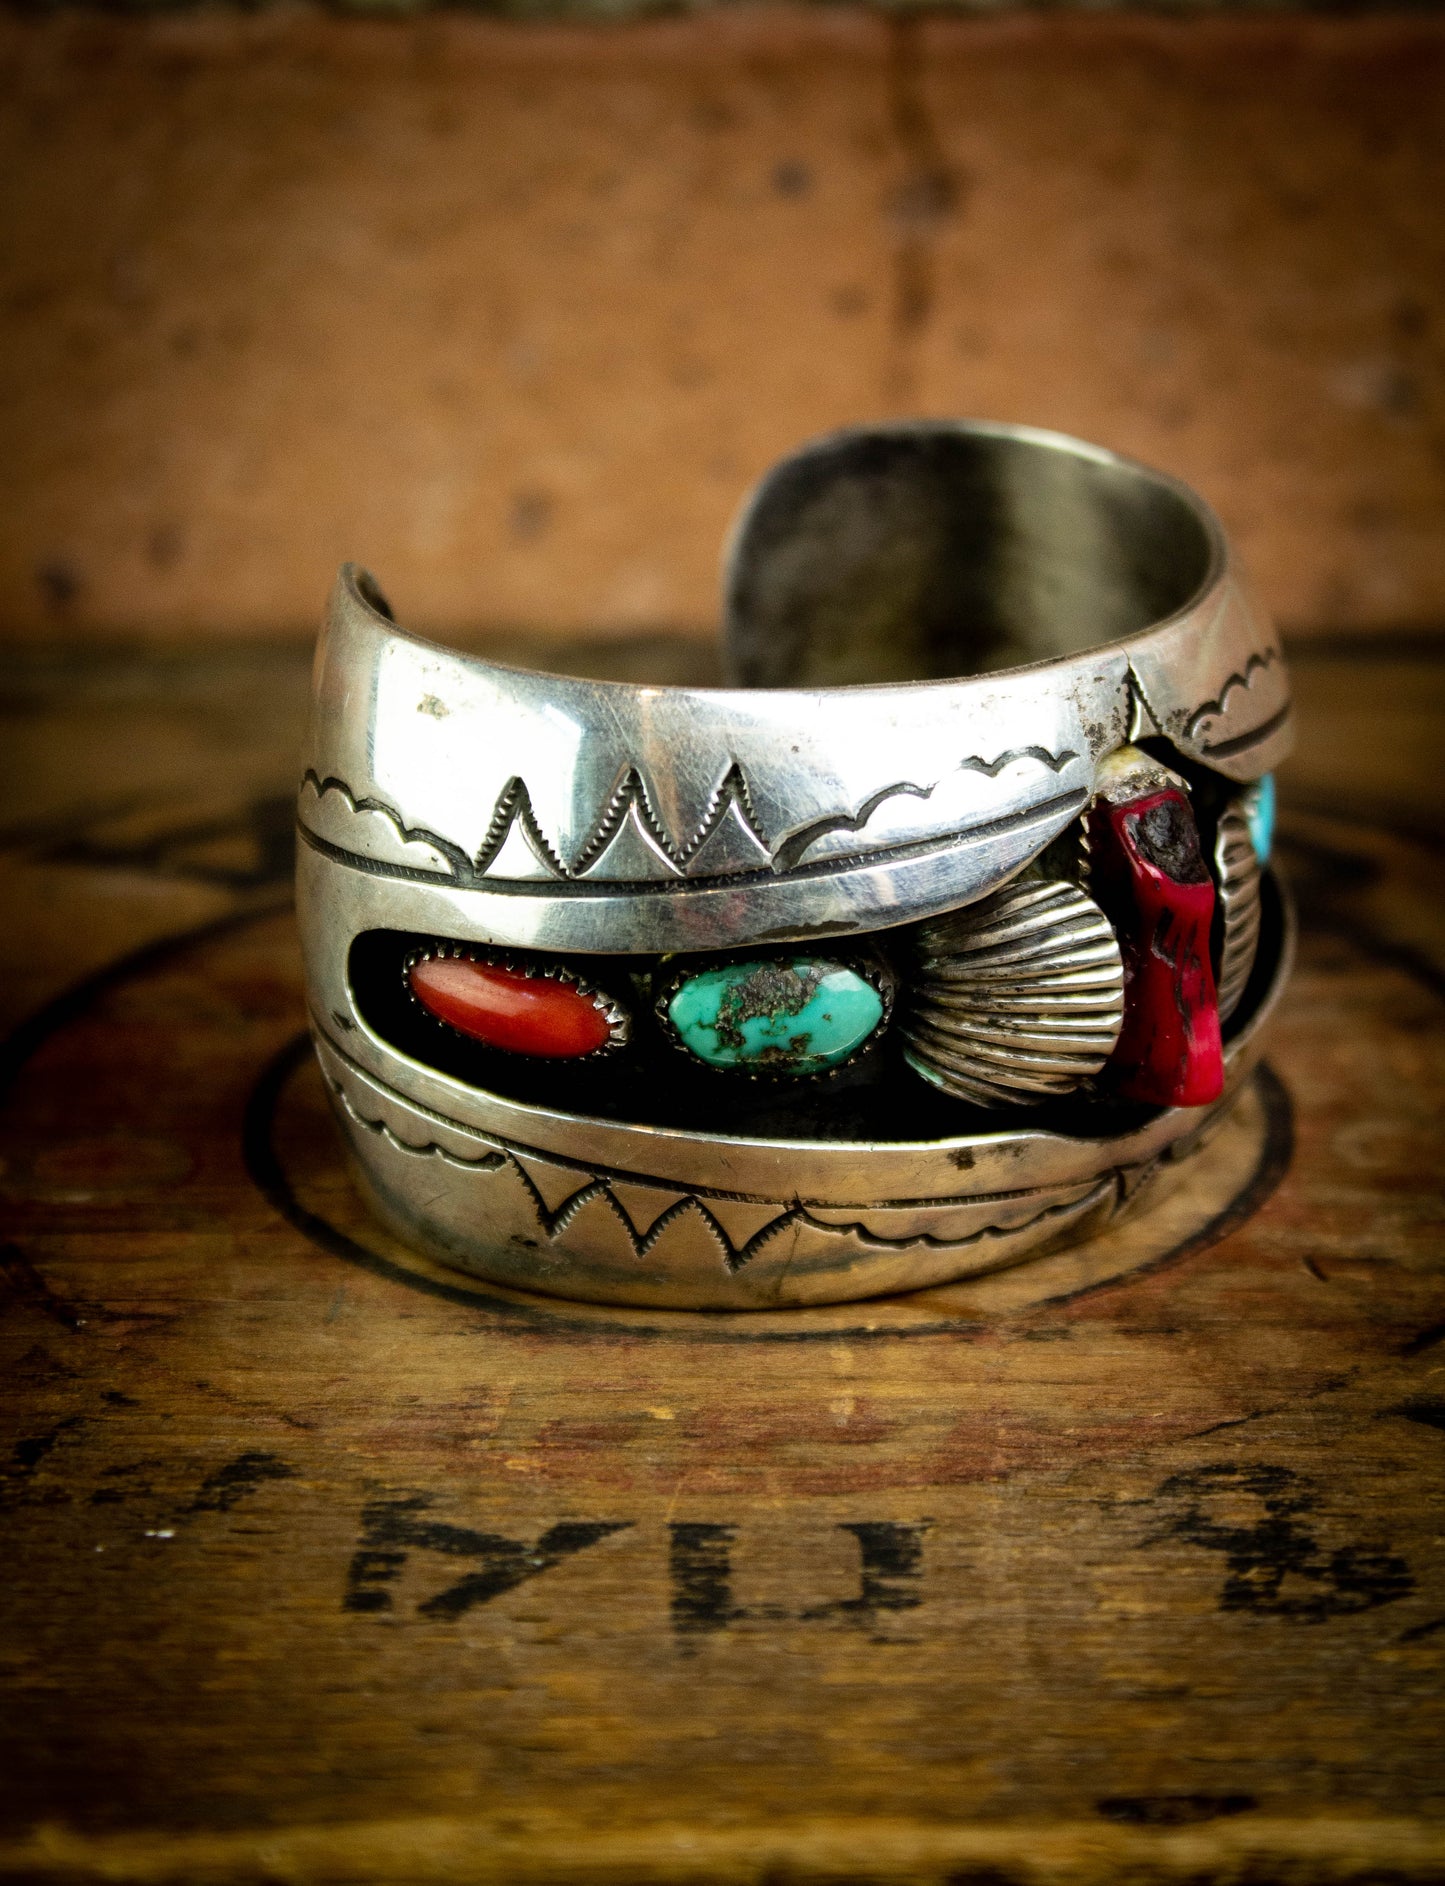 Vintage Silver Turquoise and Coral Wrist Cuff Bracelet